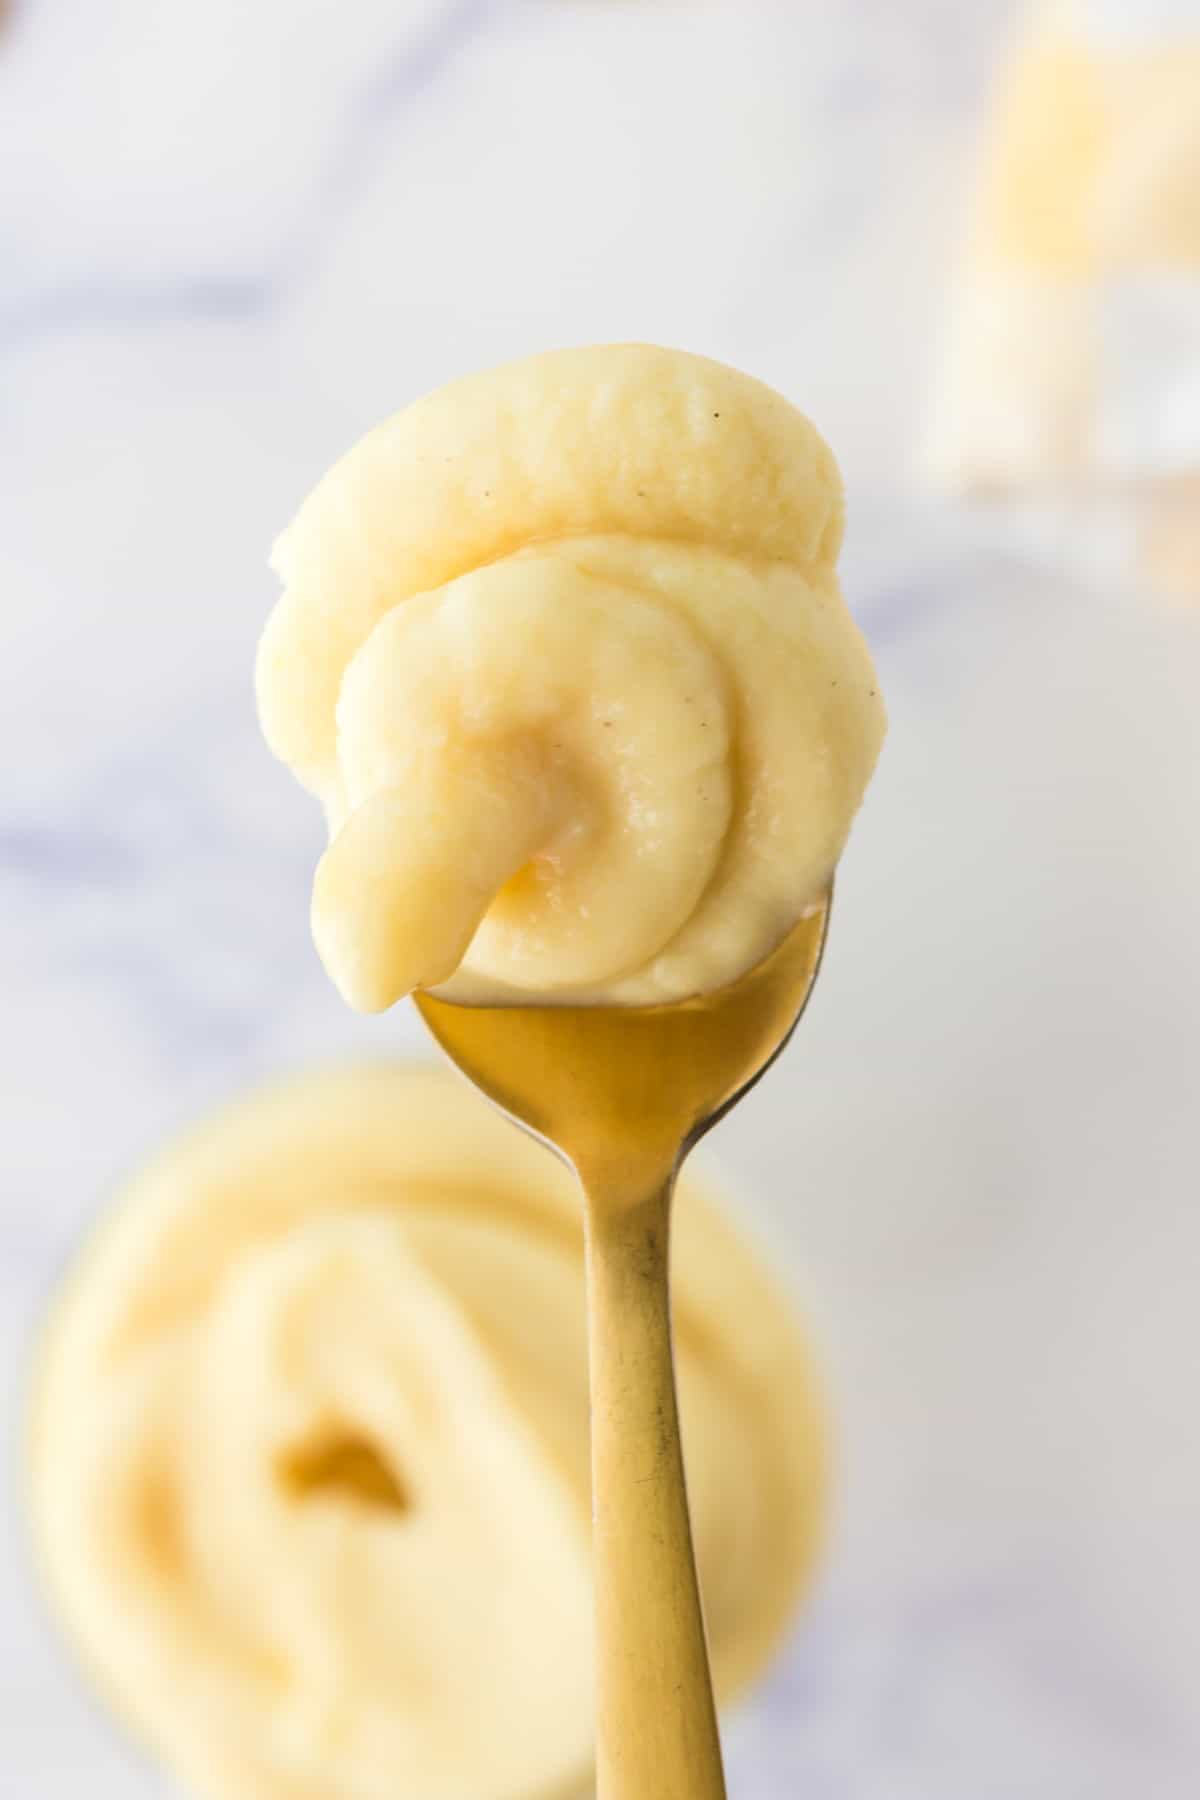 Spoonful of Dole Whip.